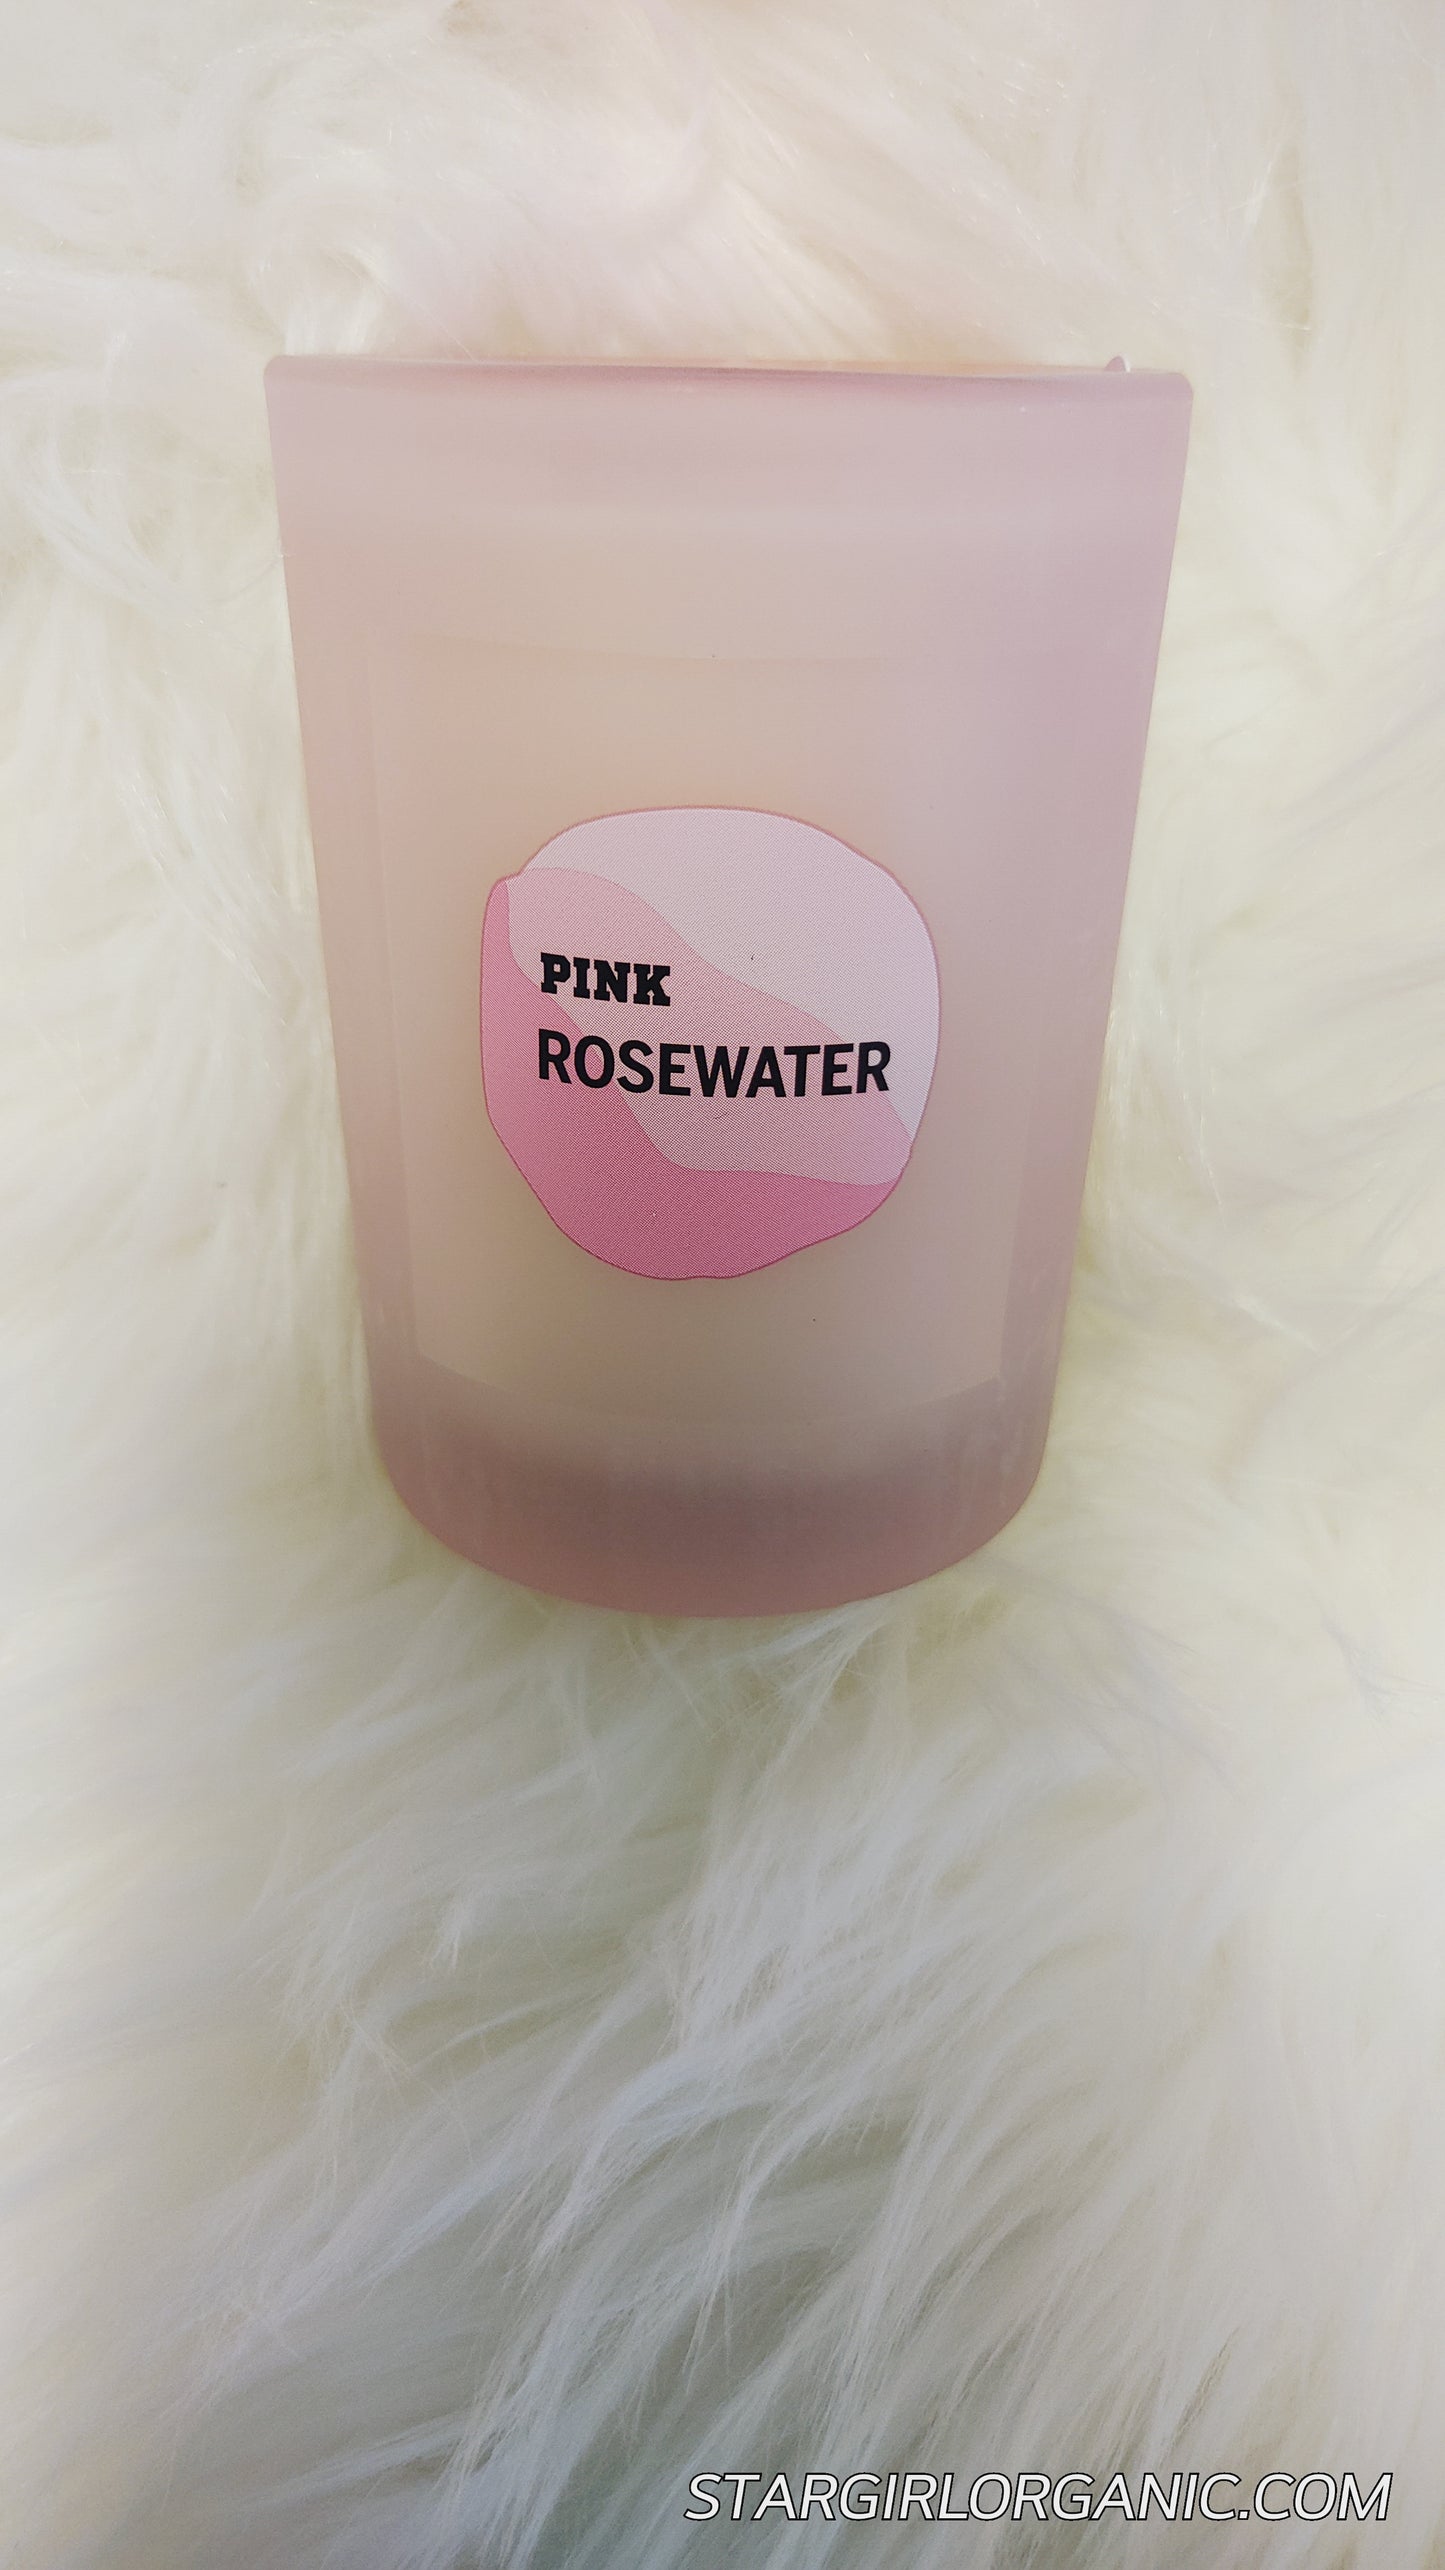 Victoria's Secret Pink Rose Water Candle